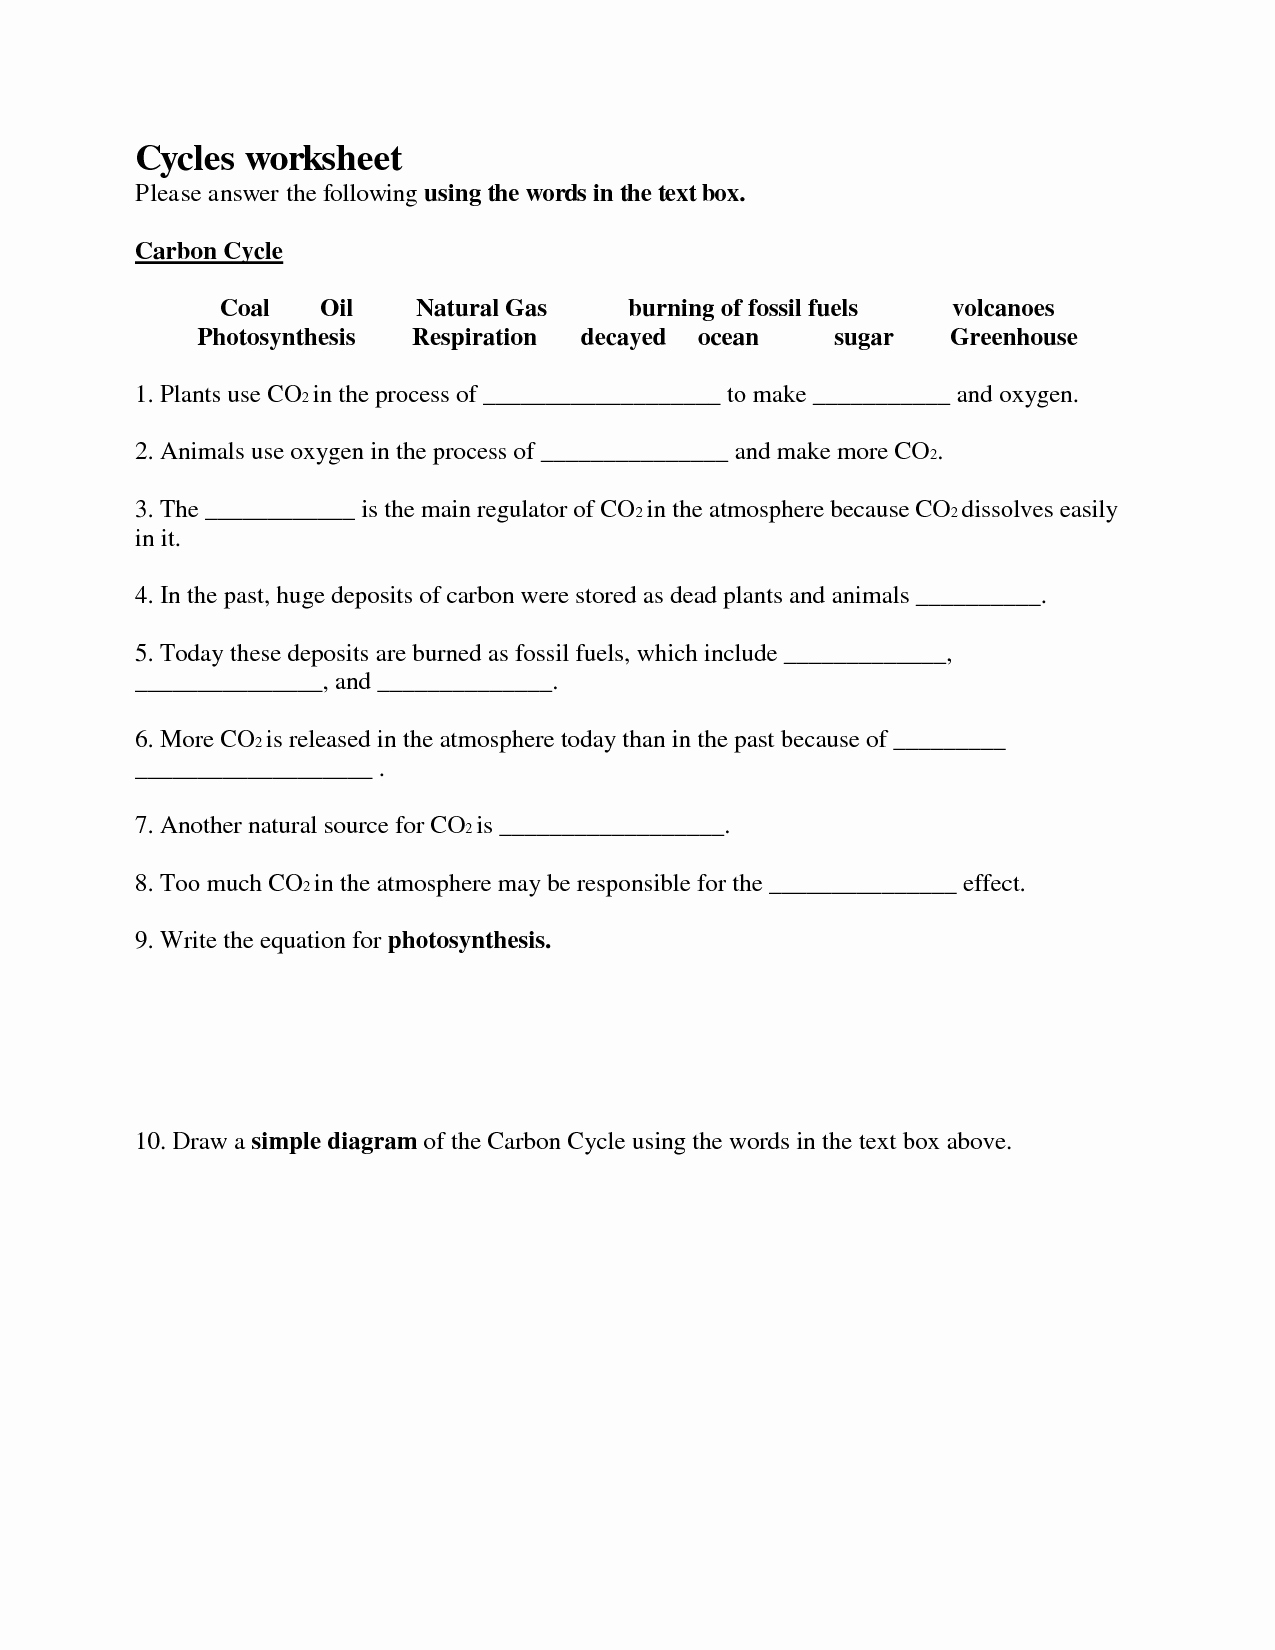 The Carbon Cycle Worksheet Answers Luxury Worksheets Cycles Worksheet Answers Cheatslist Free